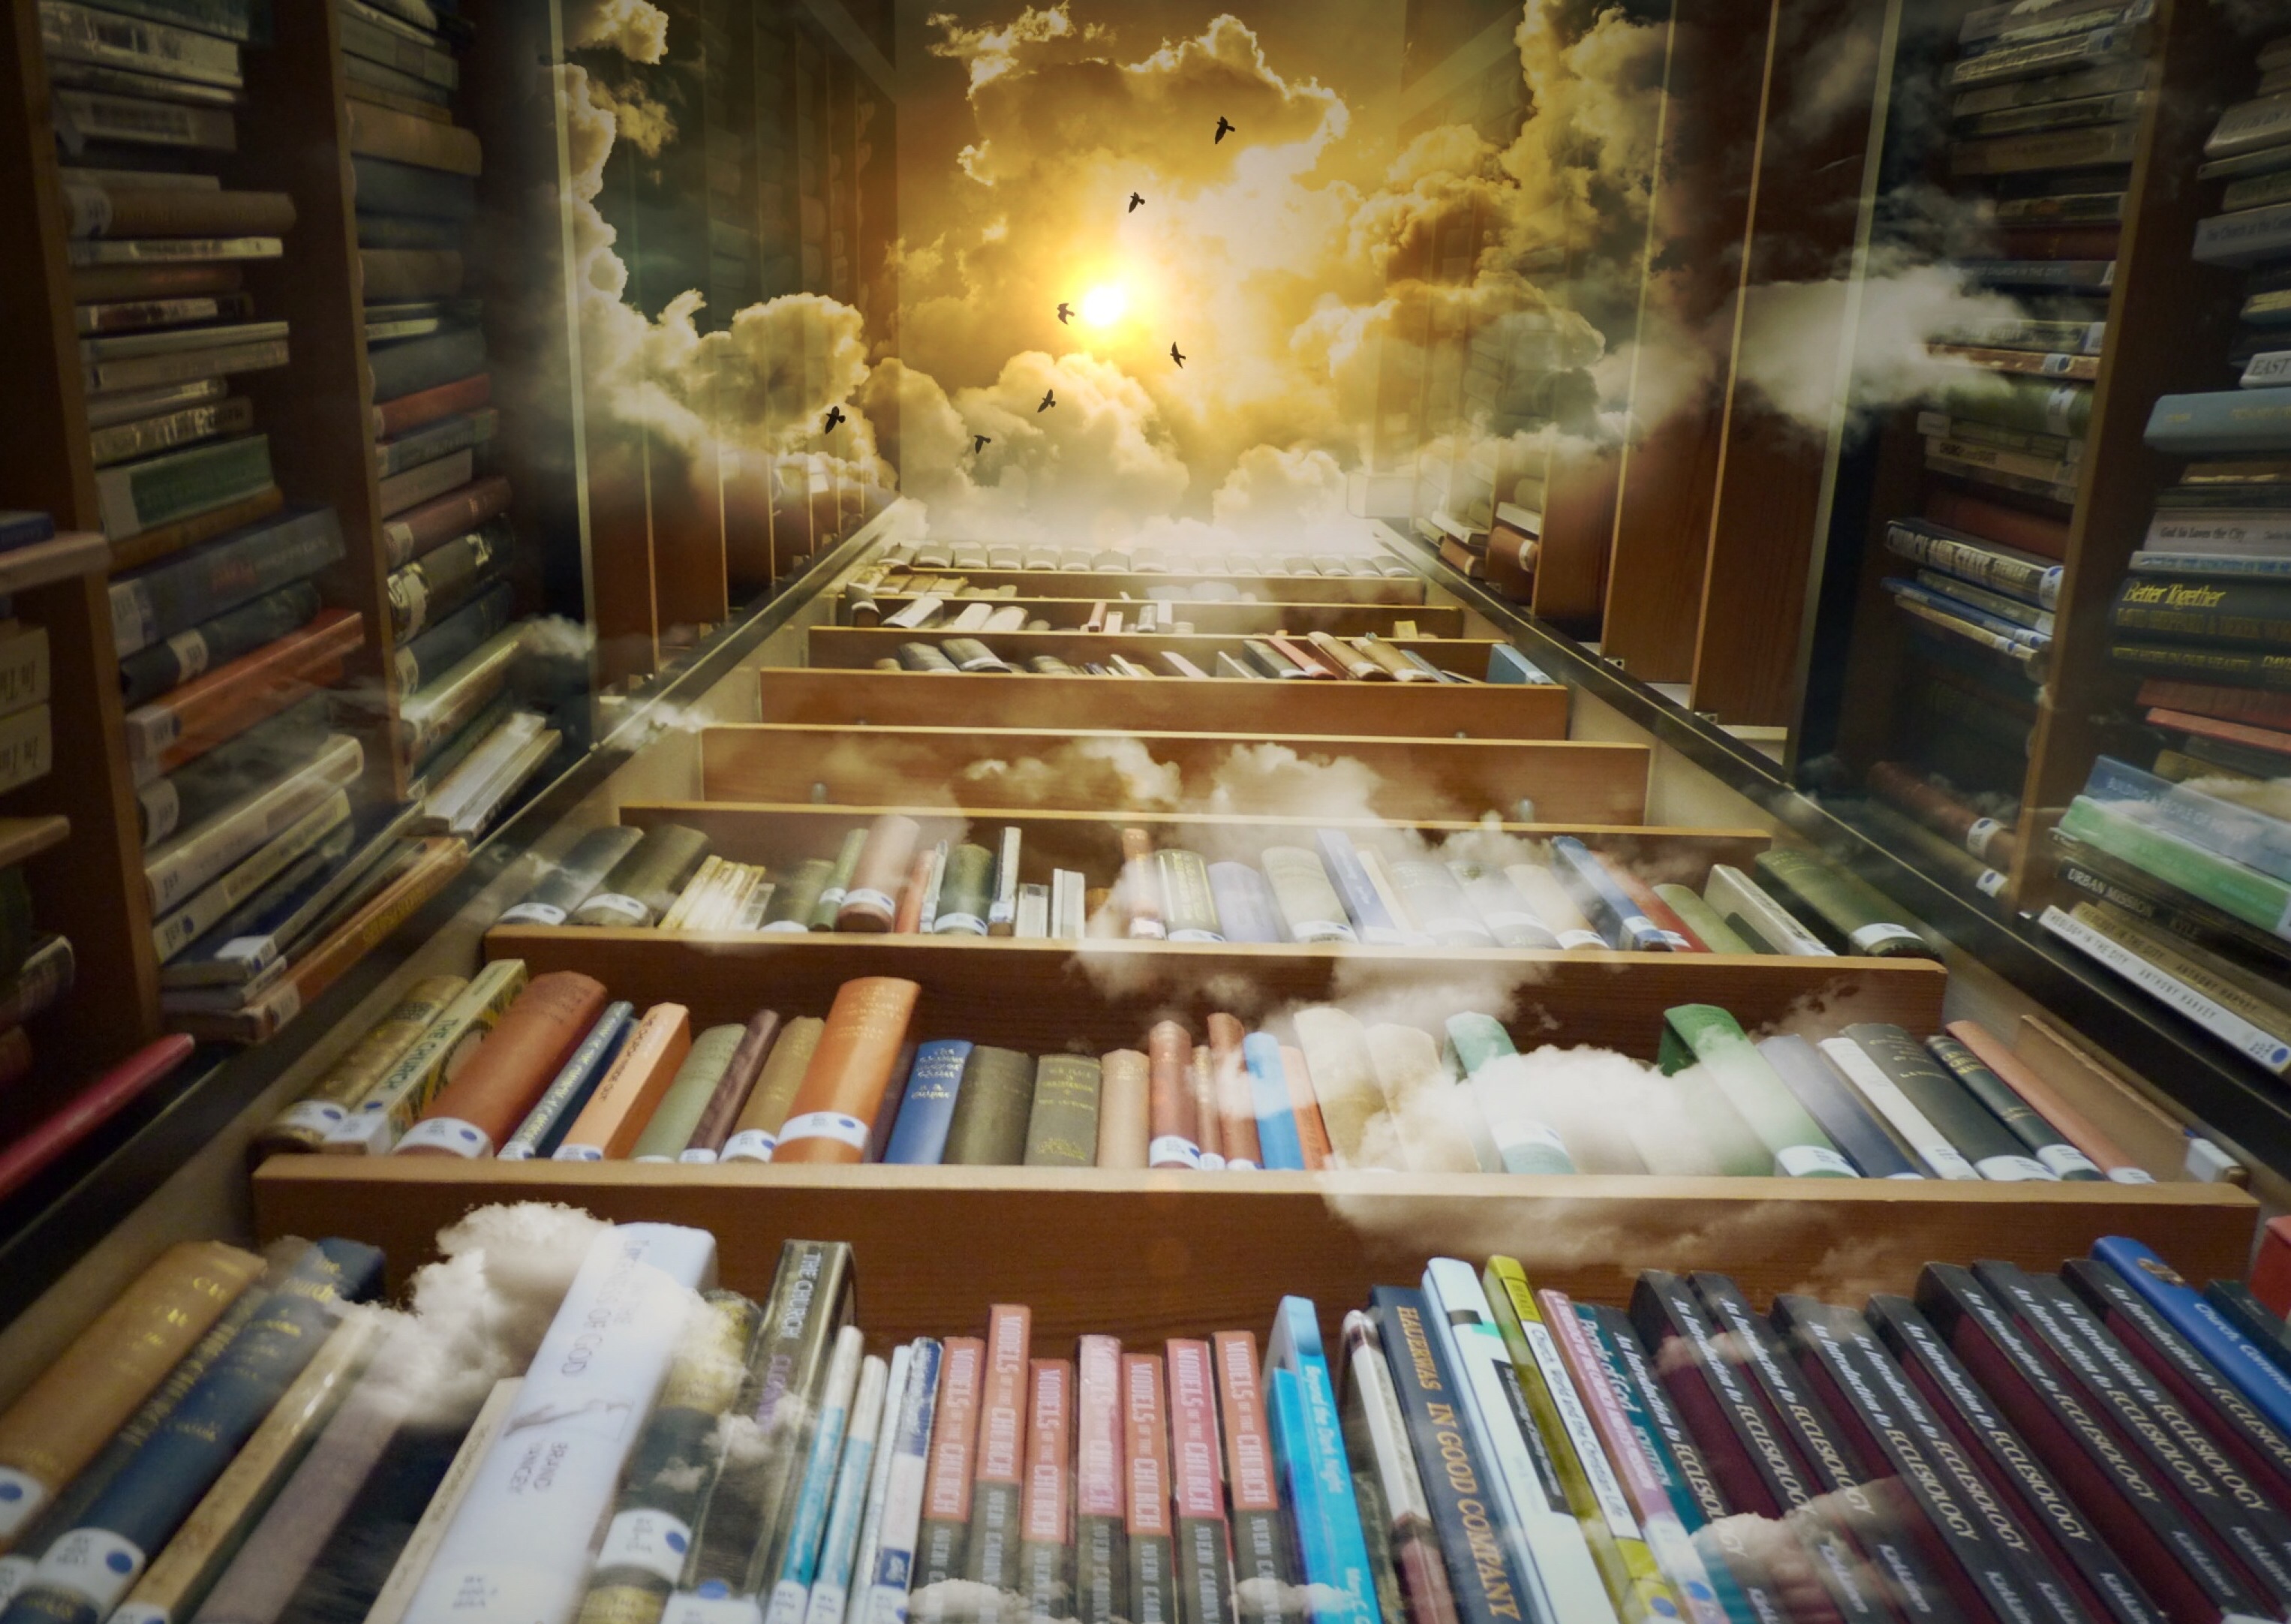 98862 download wallpaper reading, shelves, miscellanea, books, clouds, miscellaneous, flight, photoshop, library screensavers and pictures for free